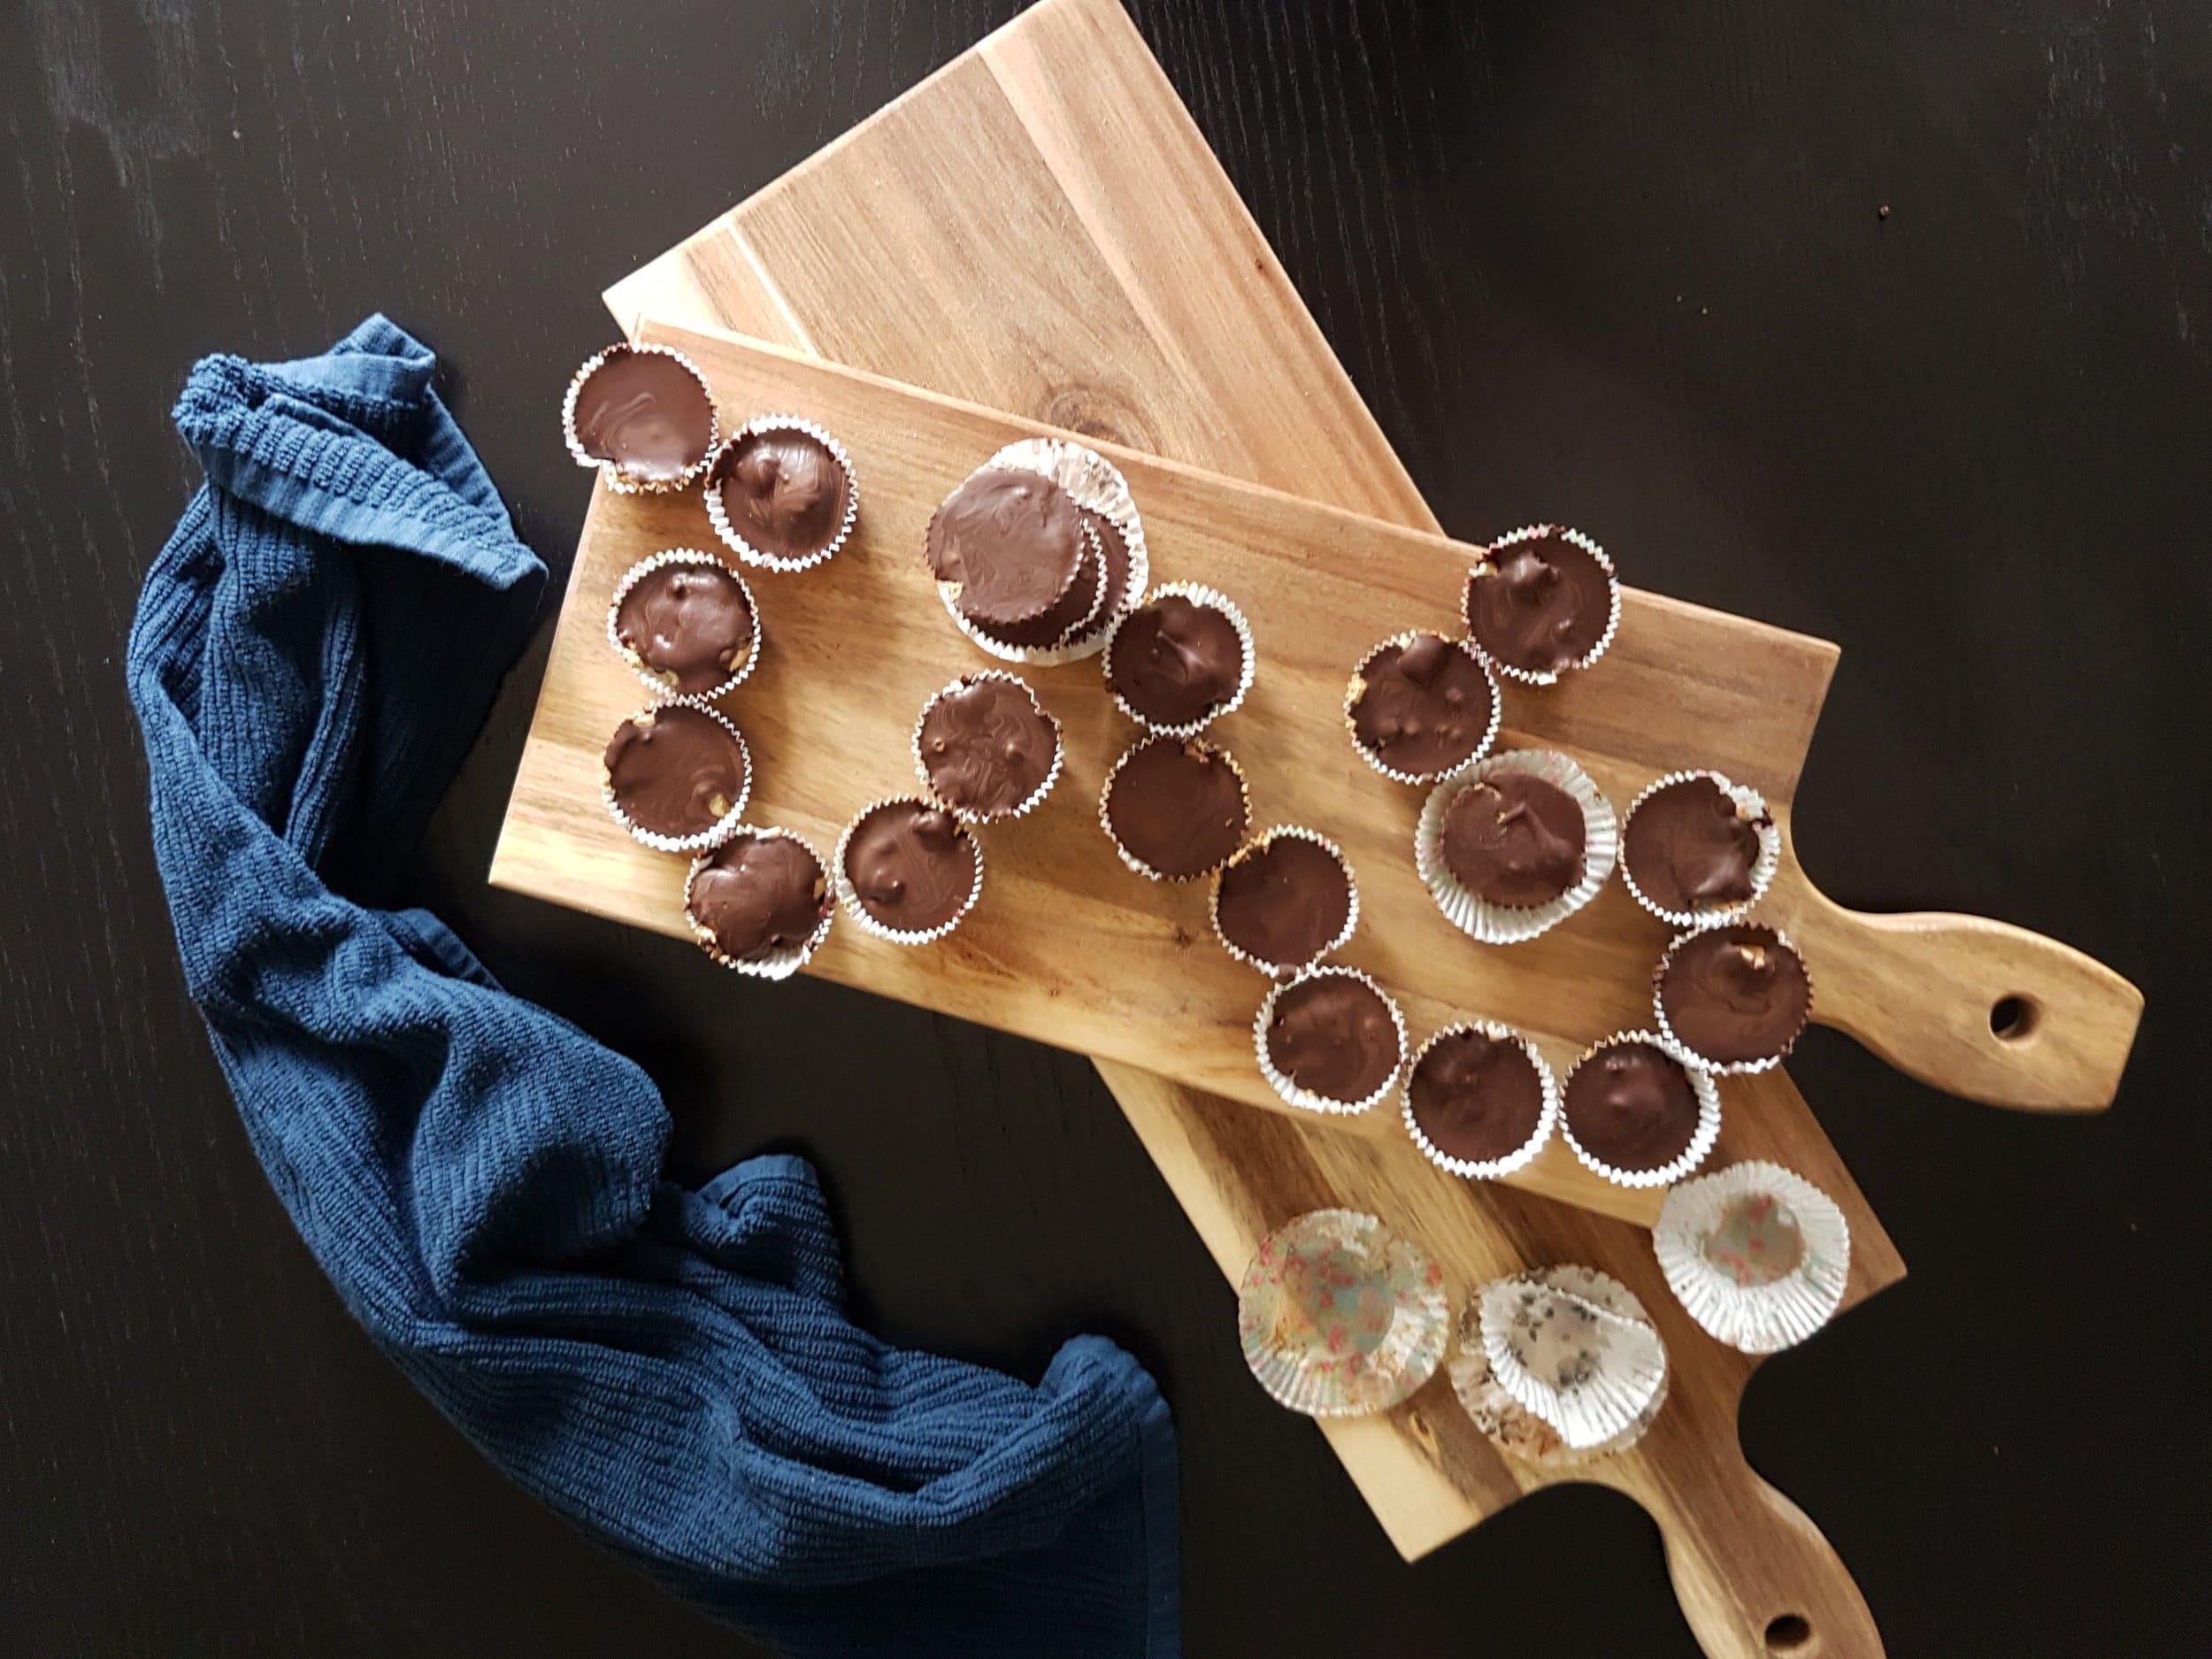 Mini Chocolate Cups with Pumpkin Spice Whipped Cream laid out on a wooden board.